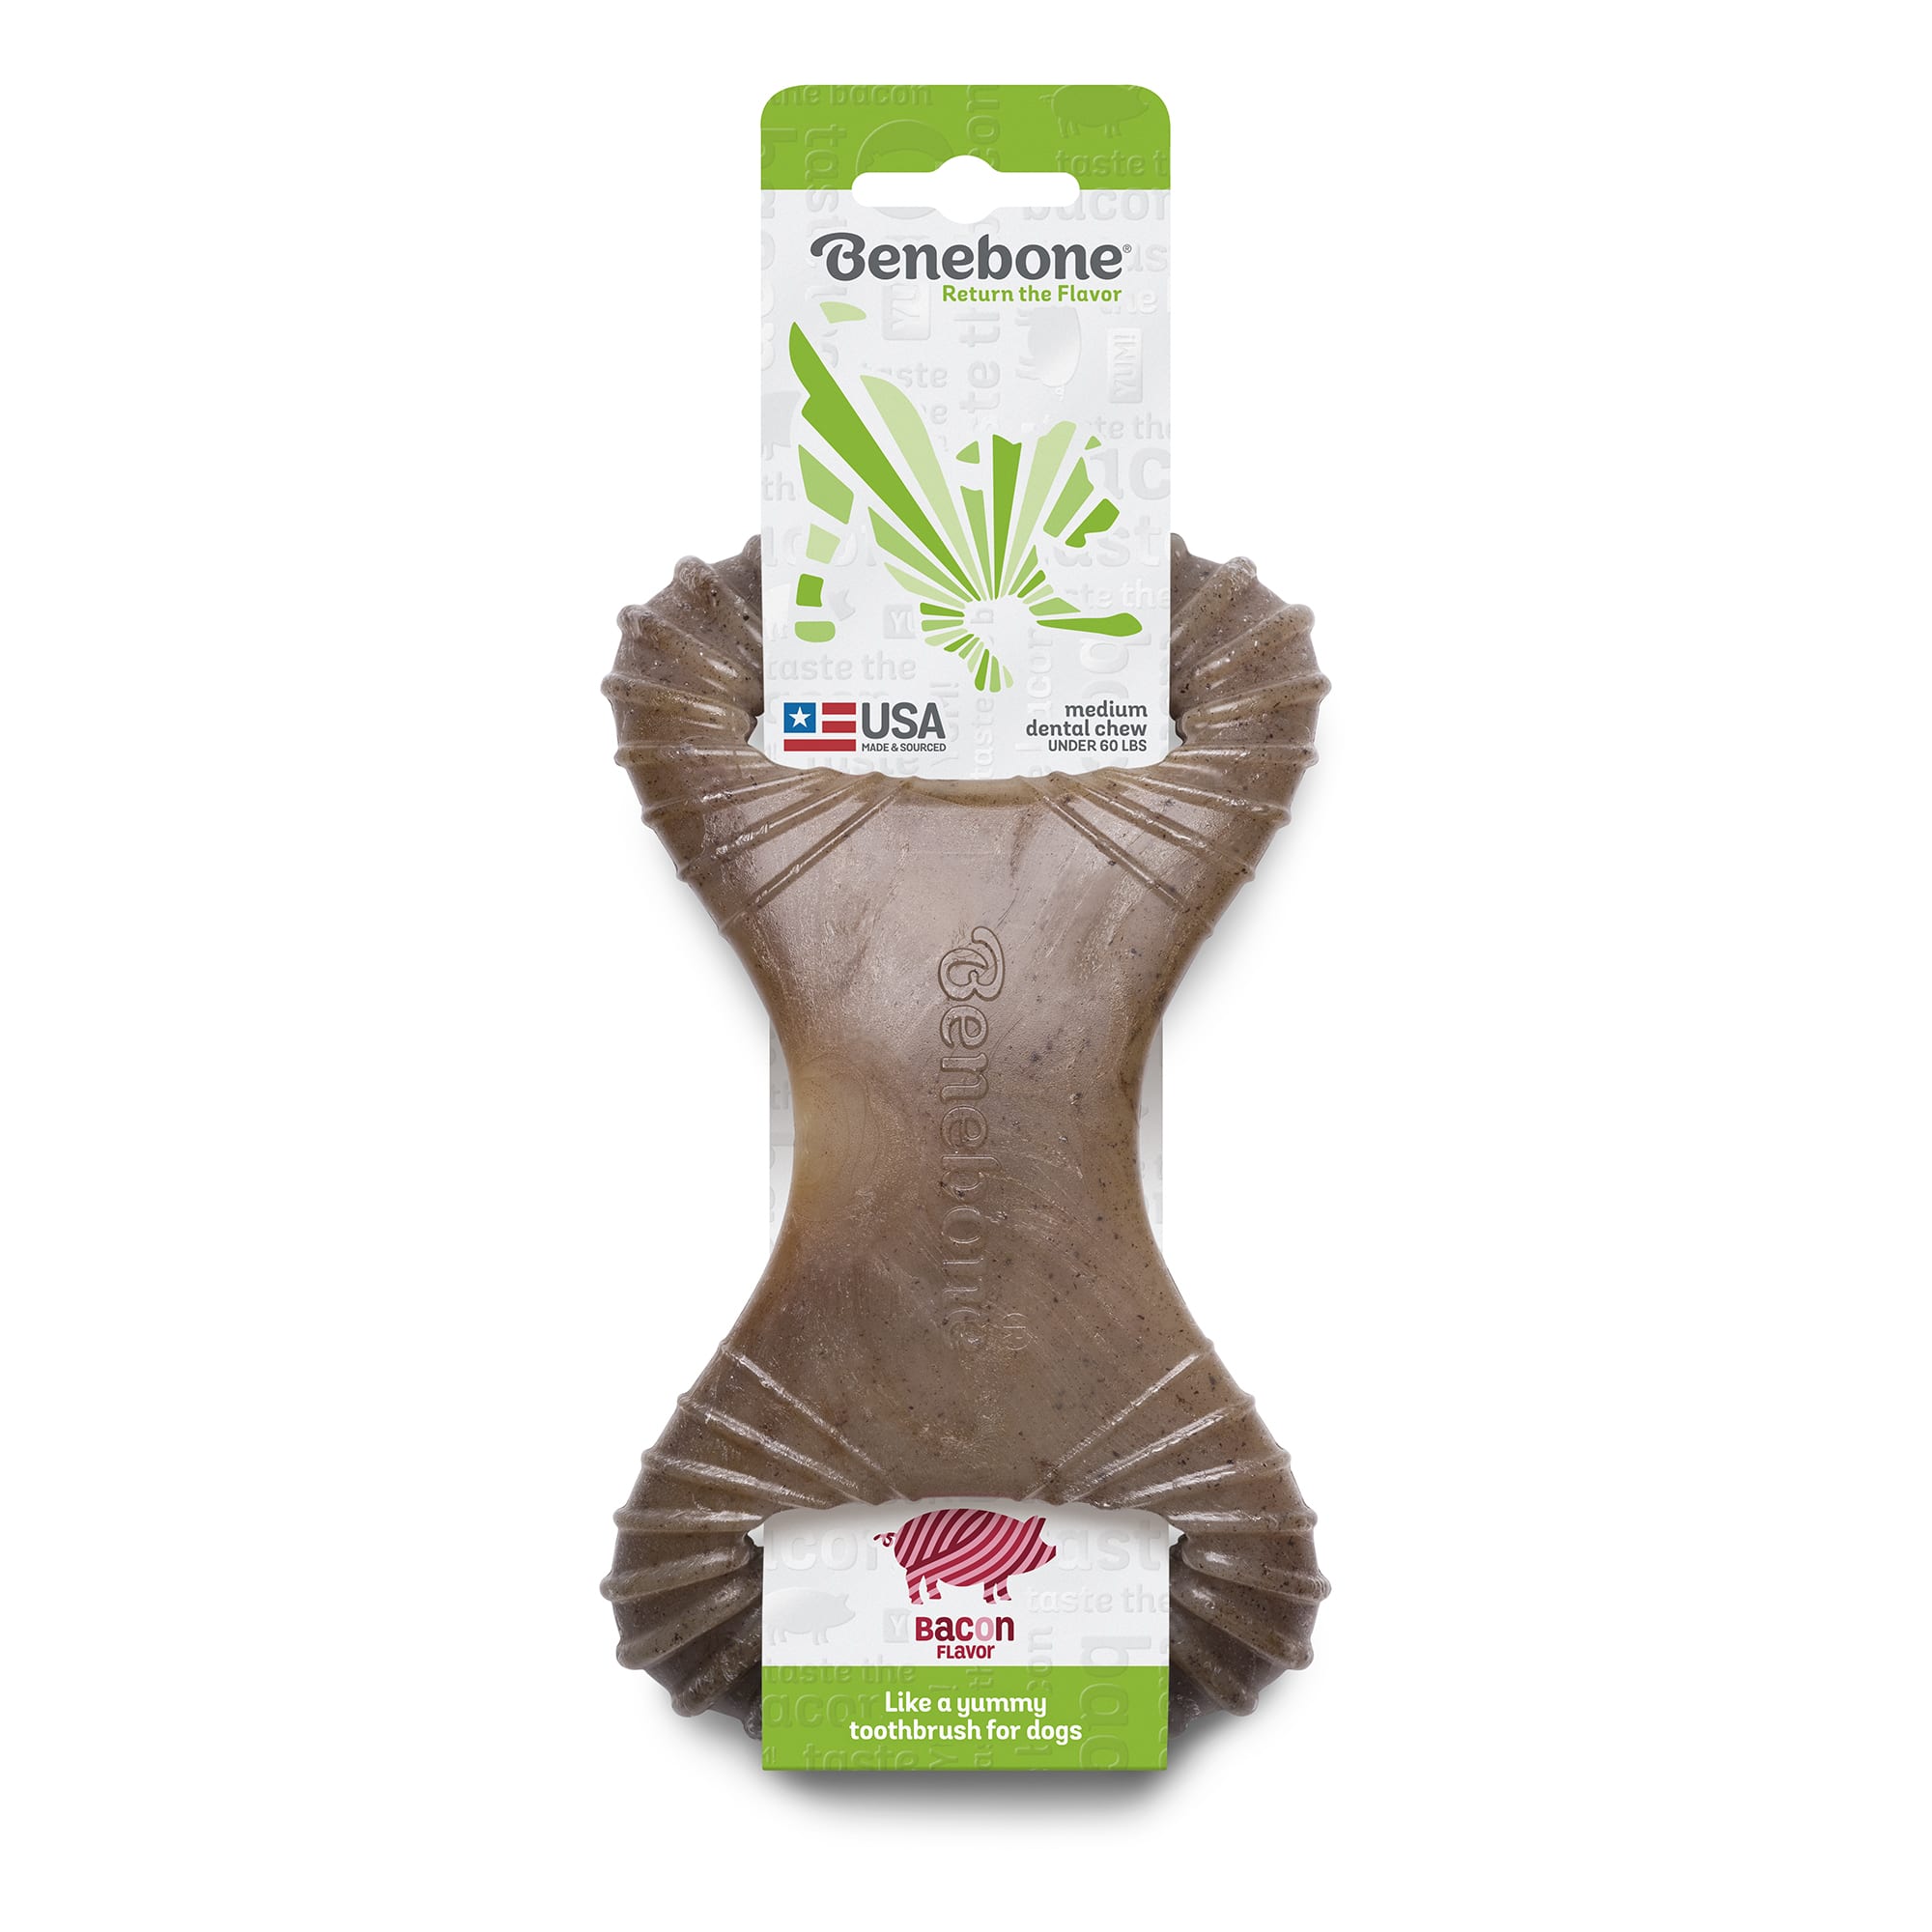 Benebone Bacon Flavored Dental Chew Toy 